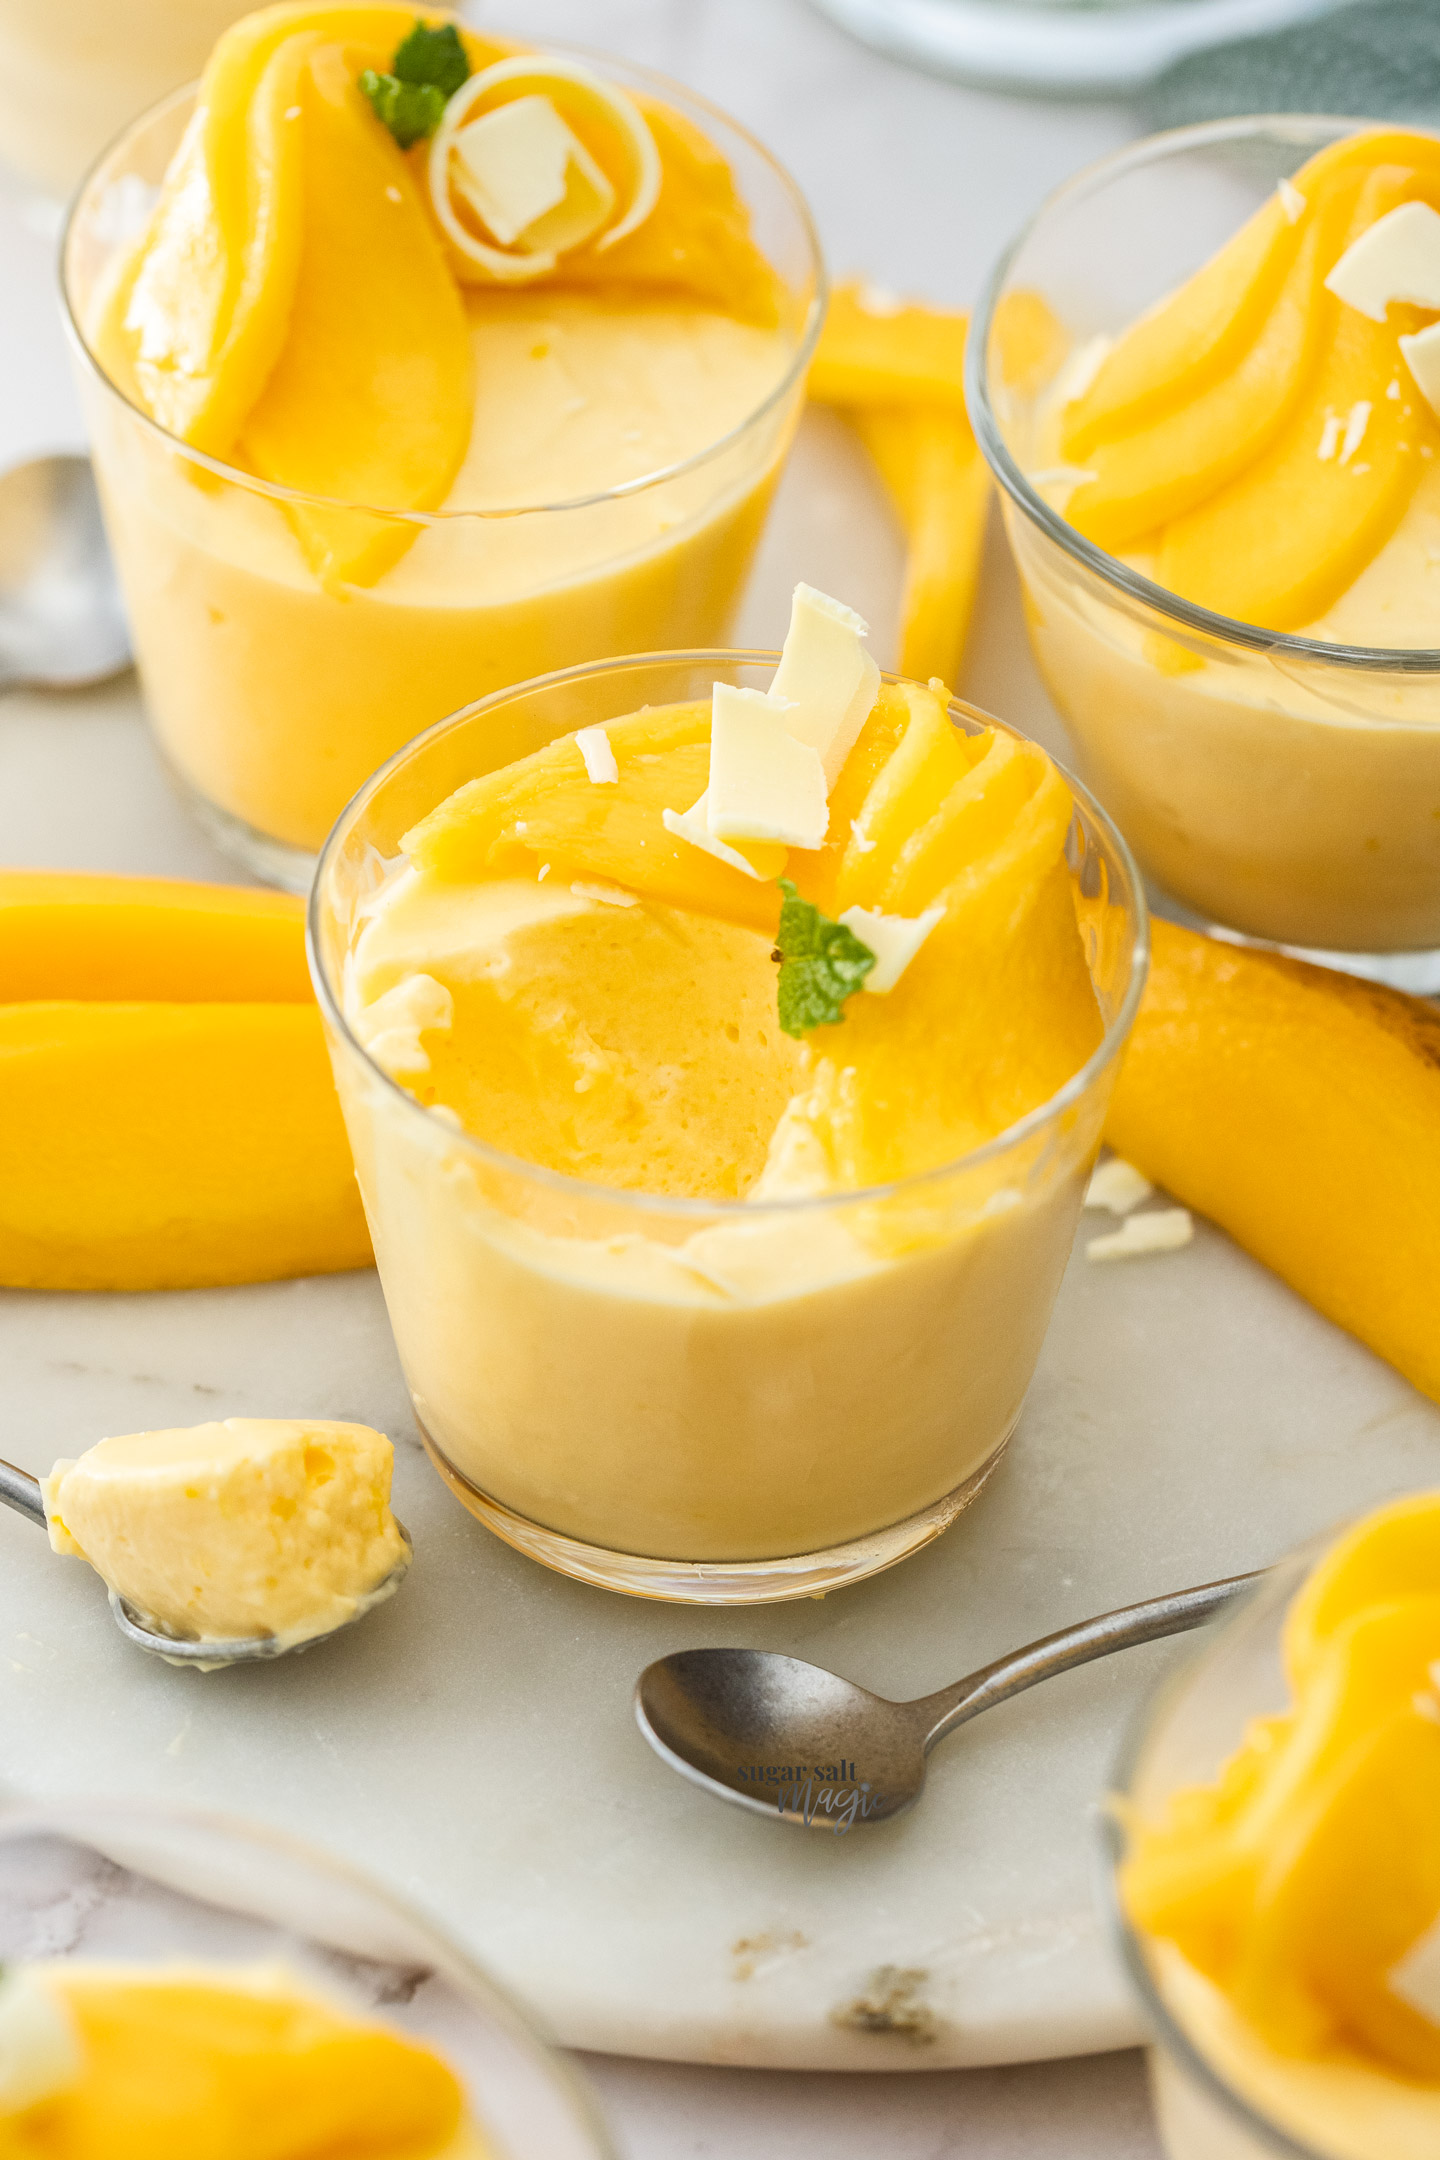 A glass of mango mousse with some taken out.